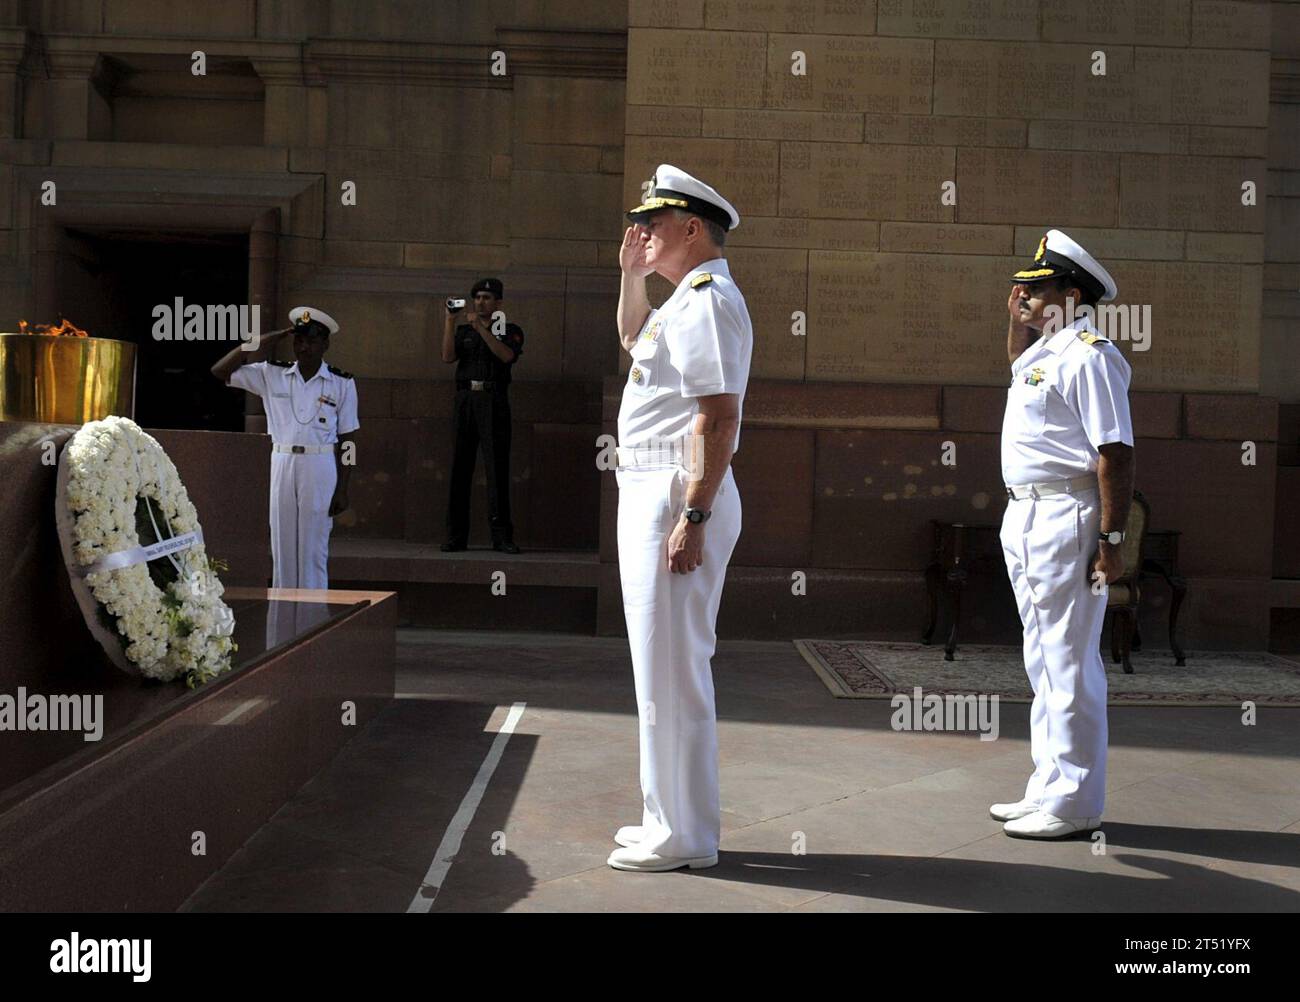 1004128273J-028 NEW DELHI (April 12, 2010) Chief of Naval Operations (CNO) Adm. Gary Roughead renders honors during a wreath laying ceremony at Amar Jawan Jyoti in New Delhi.  Navy Stock Photo